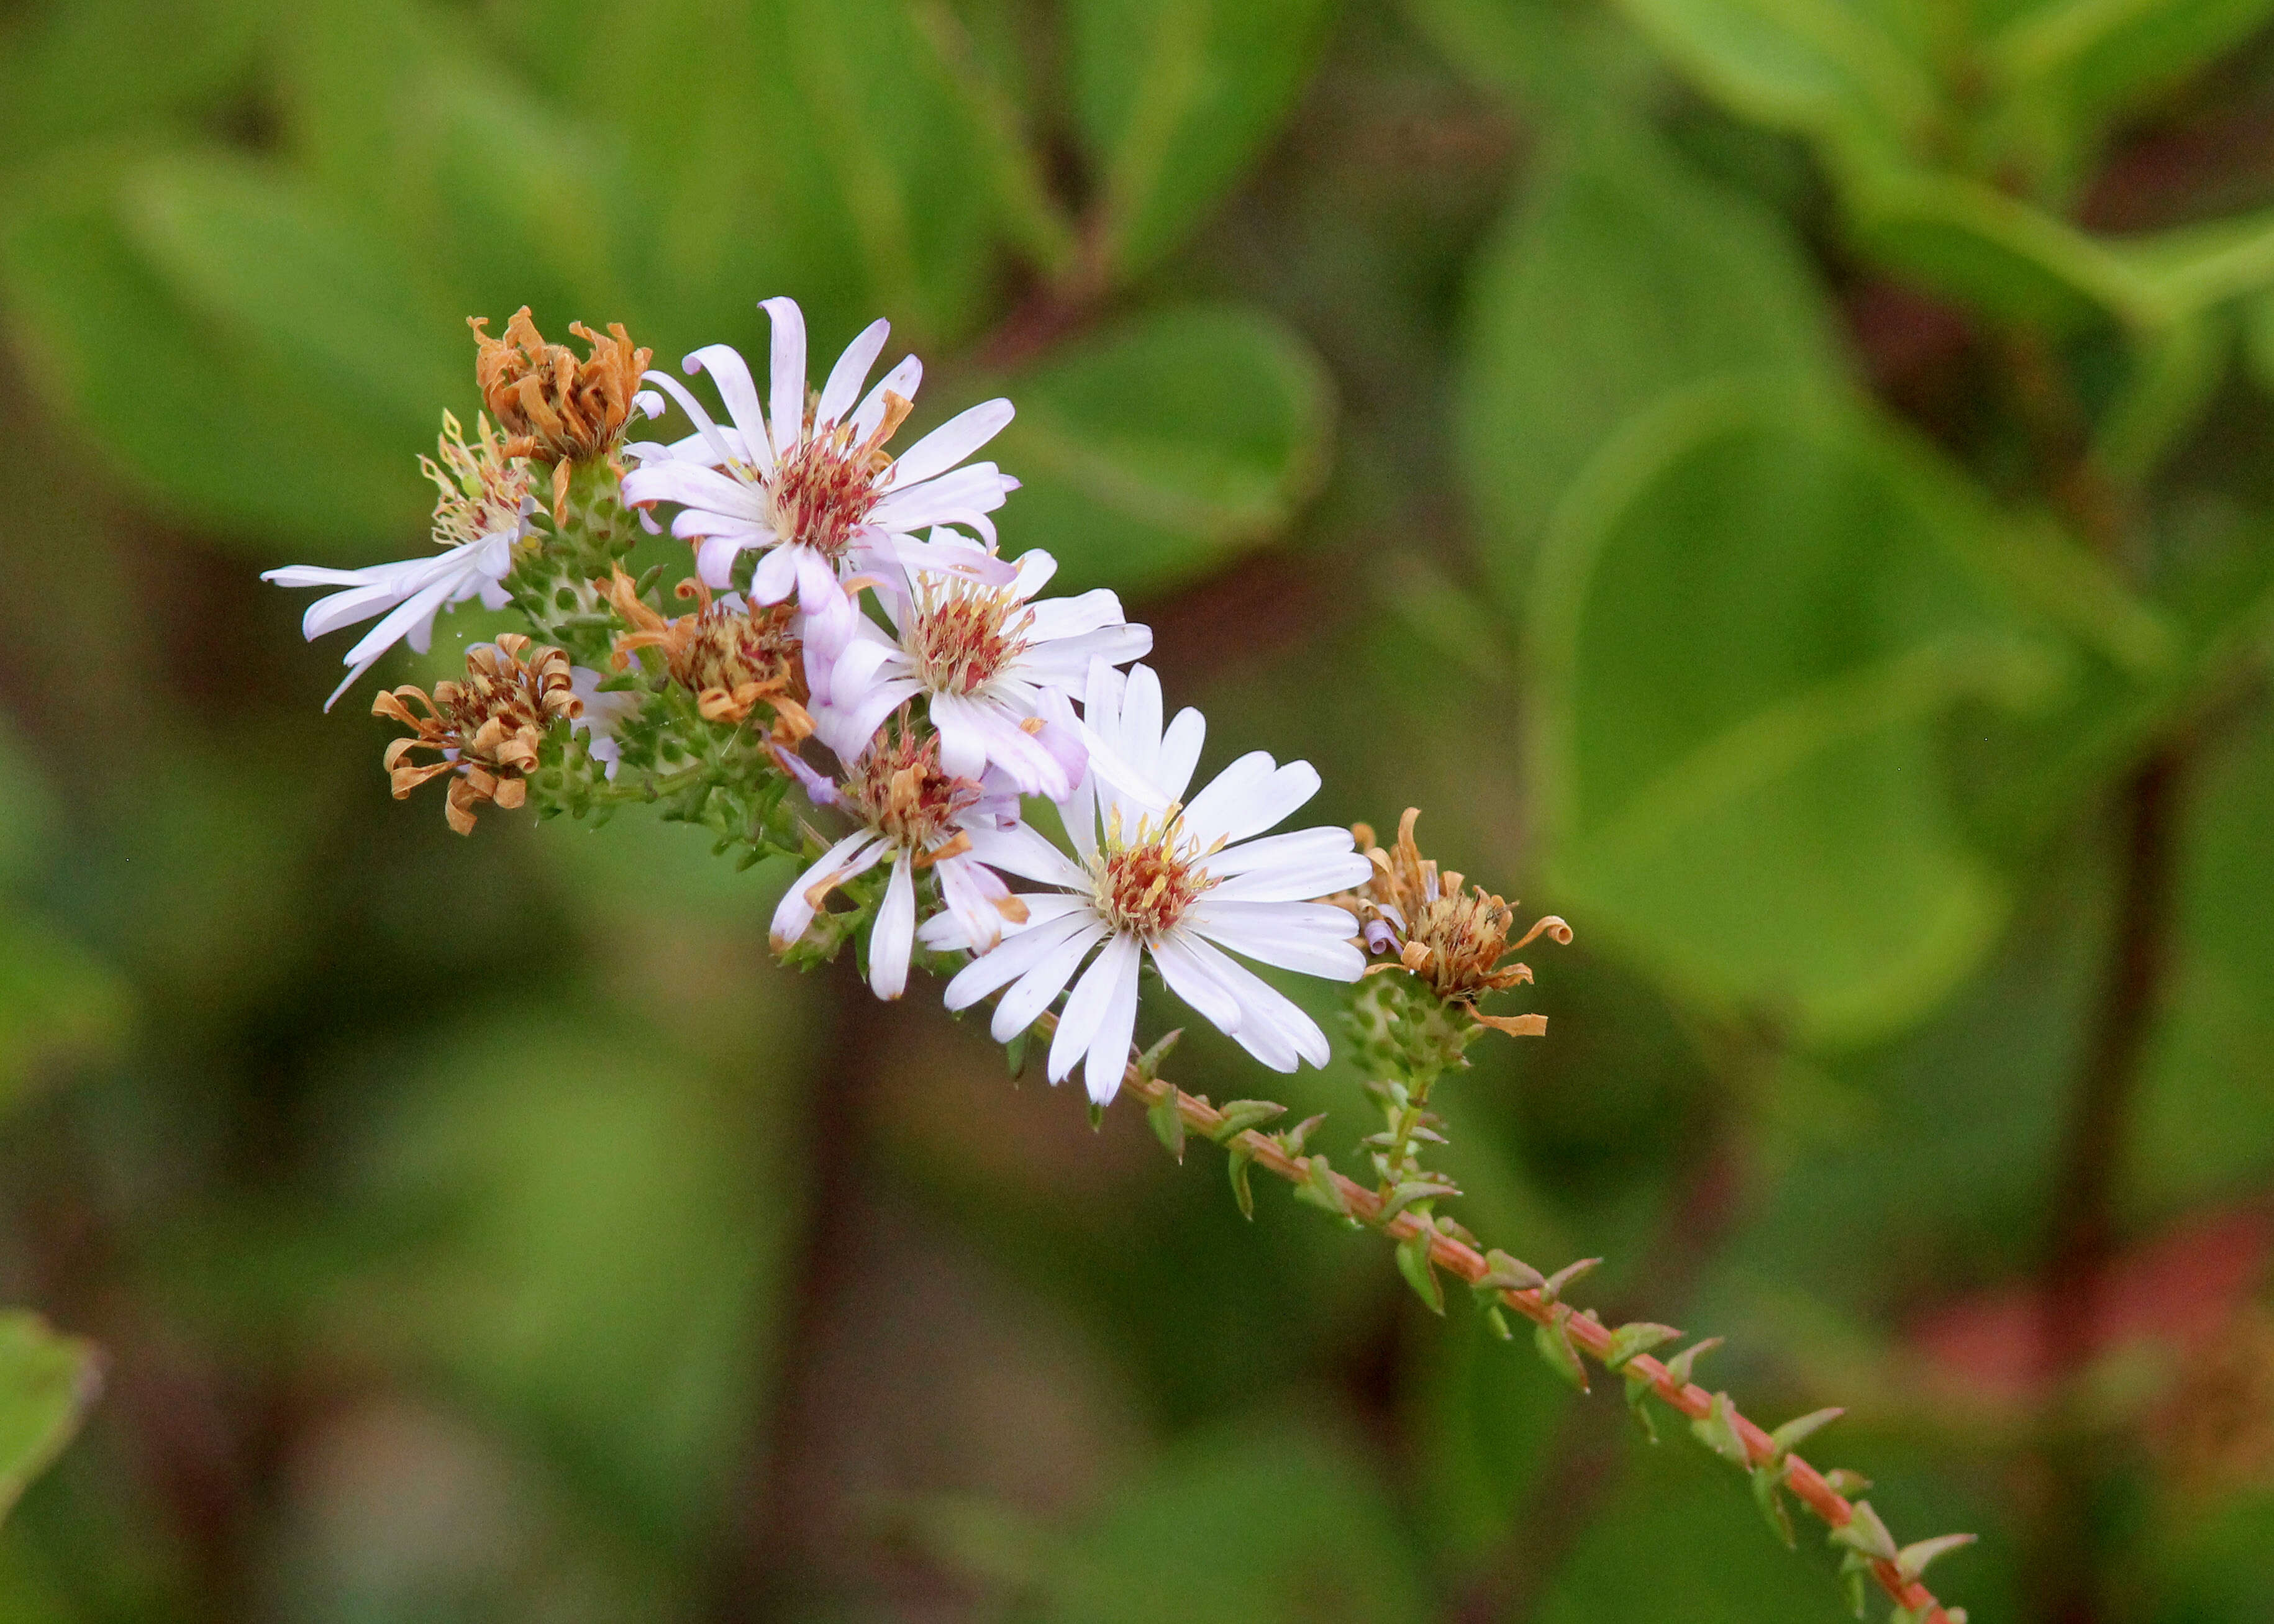 Image of Walter's aster